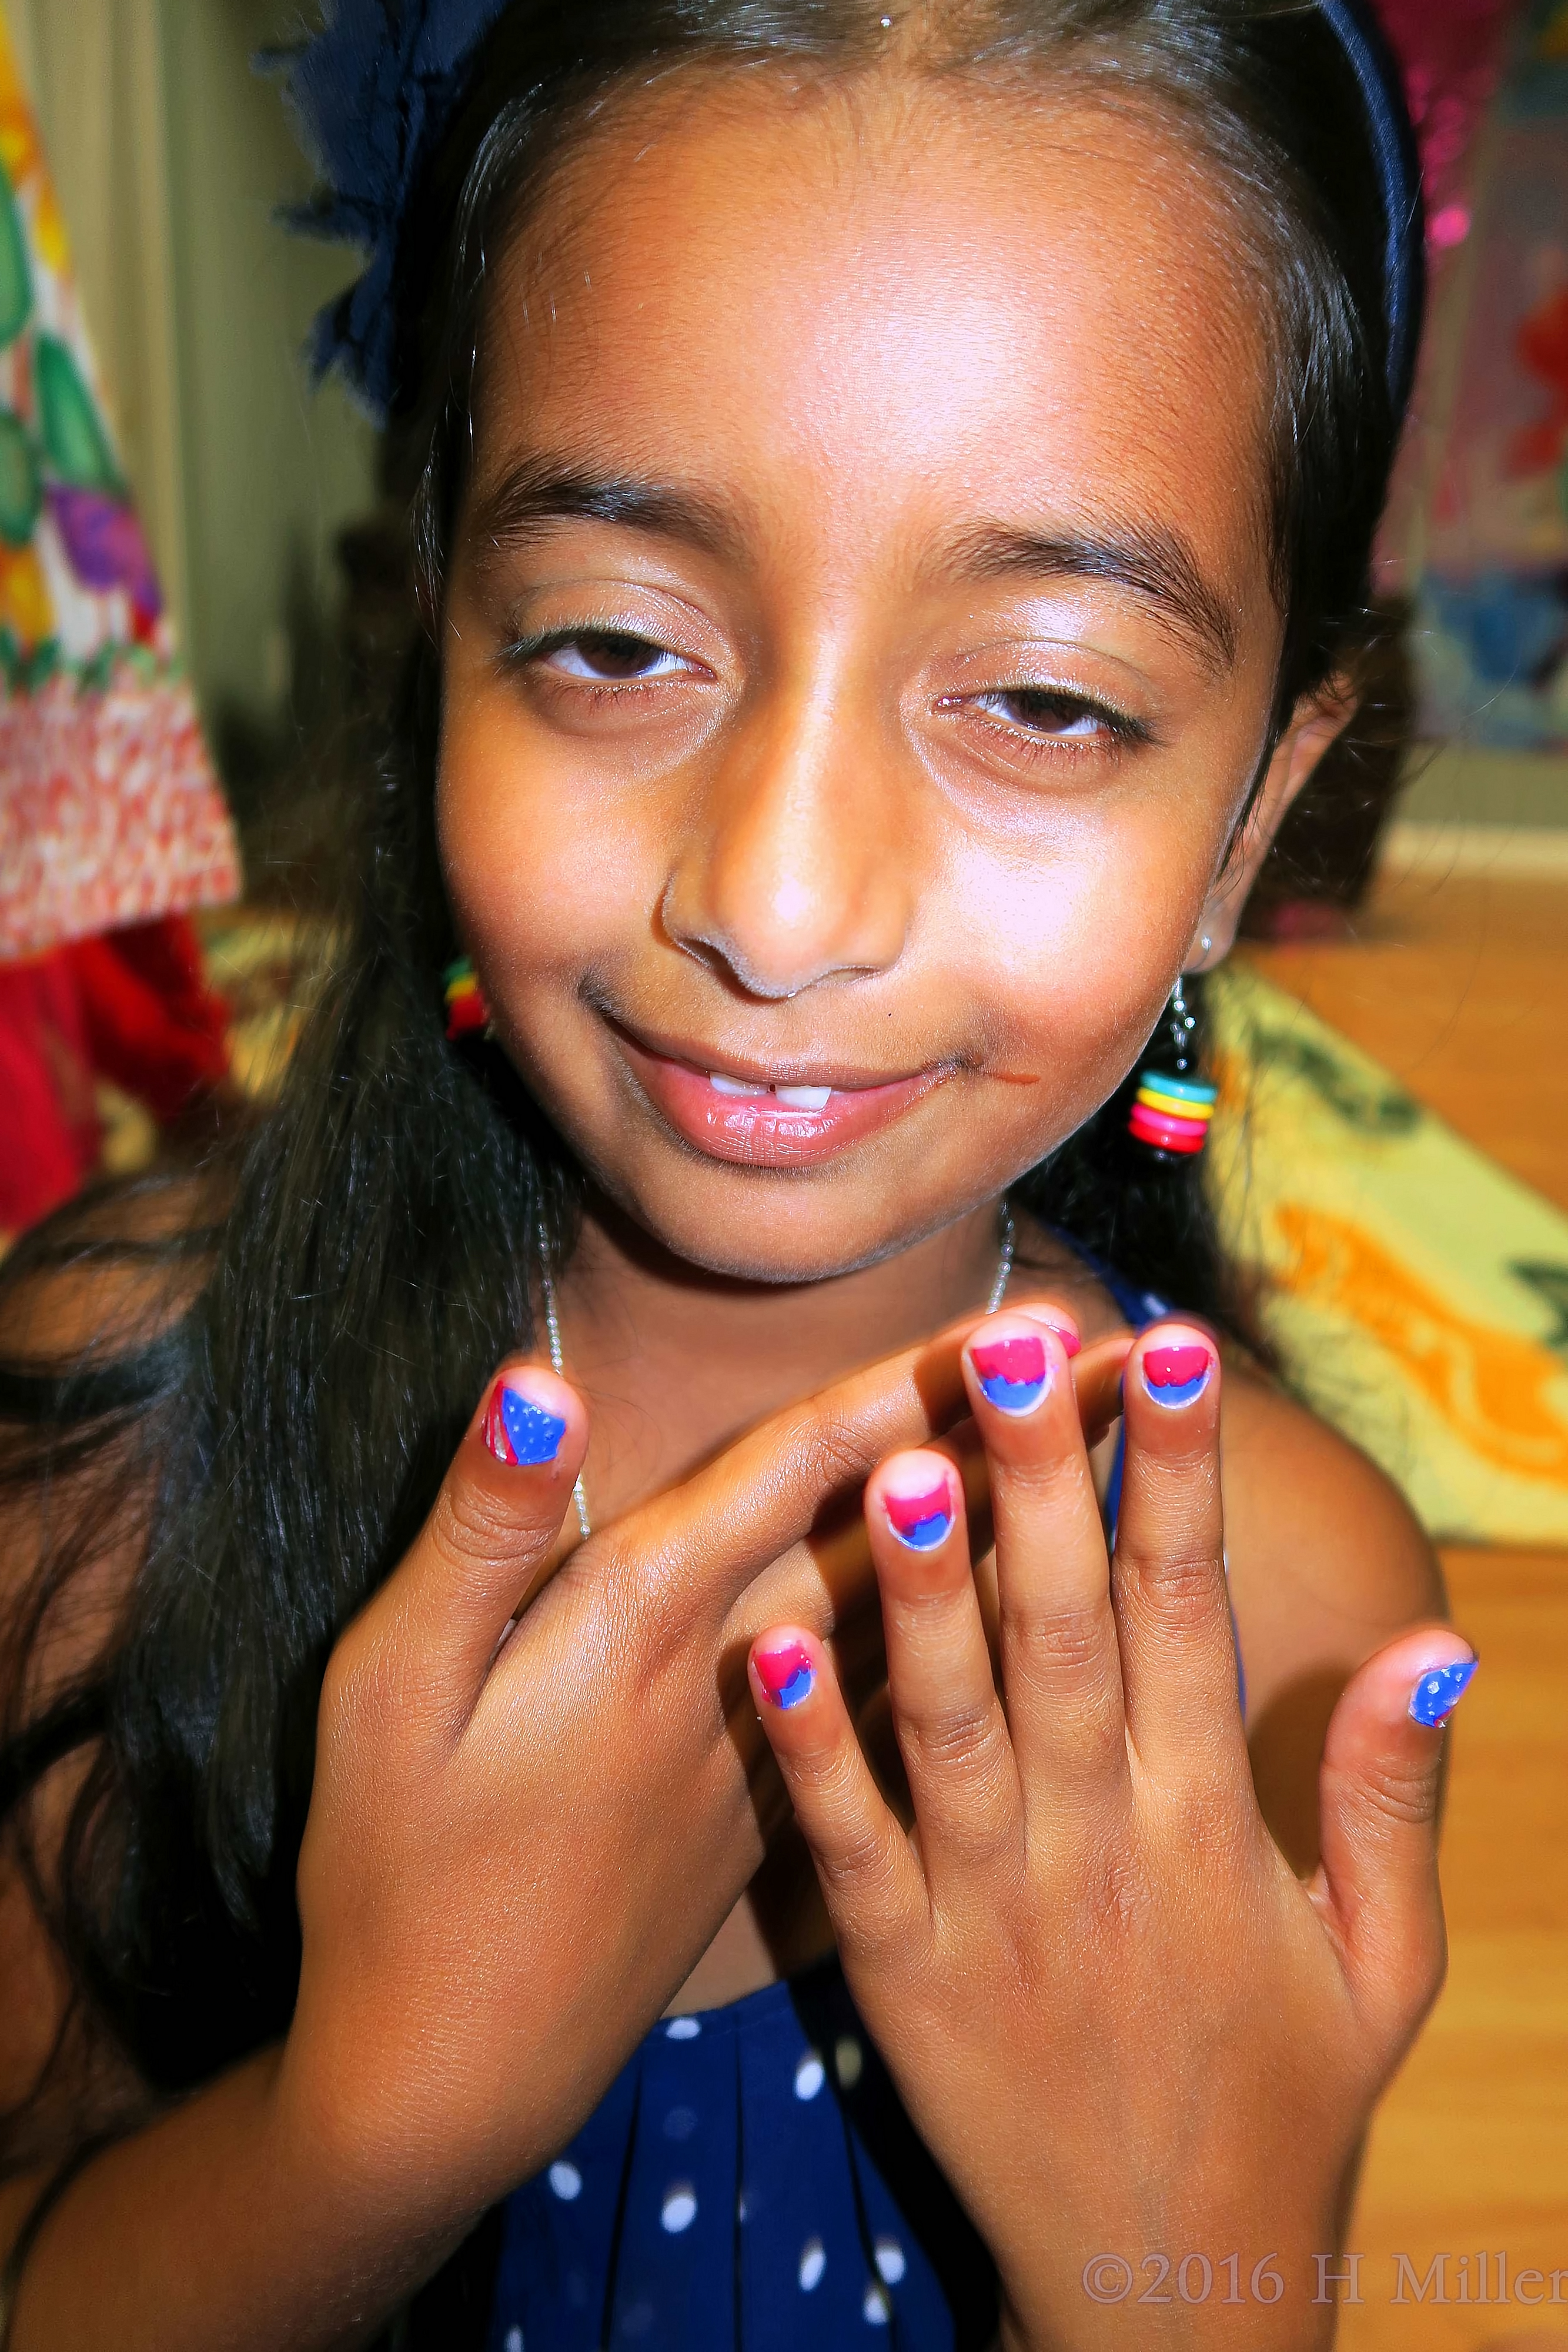 She's Super Happy With Her New Manicure For Girls!